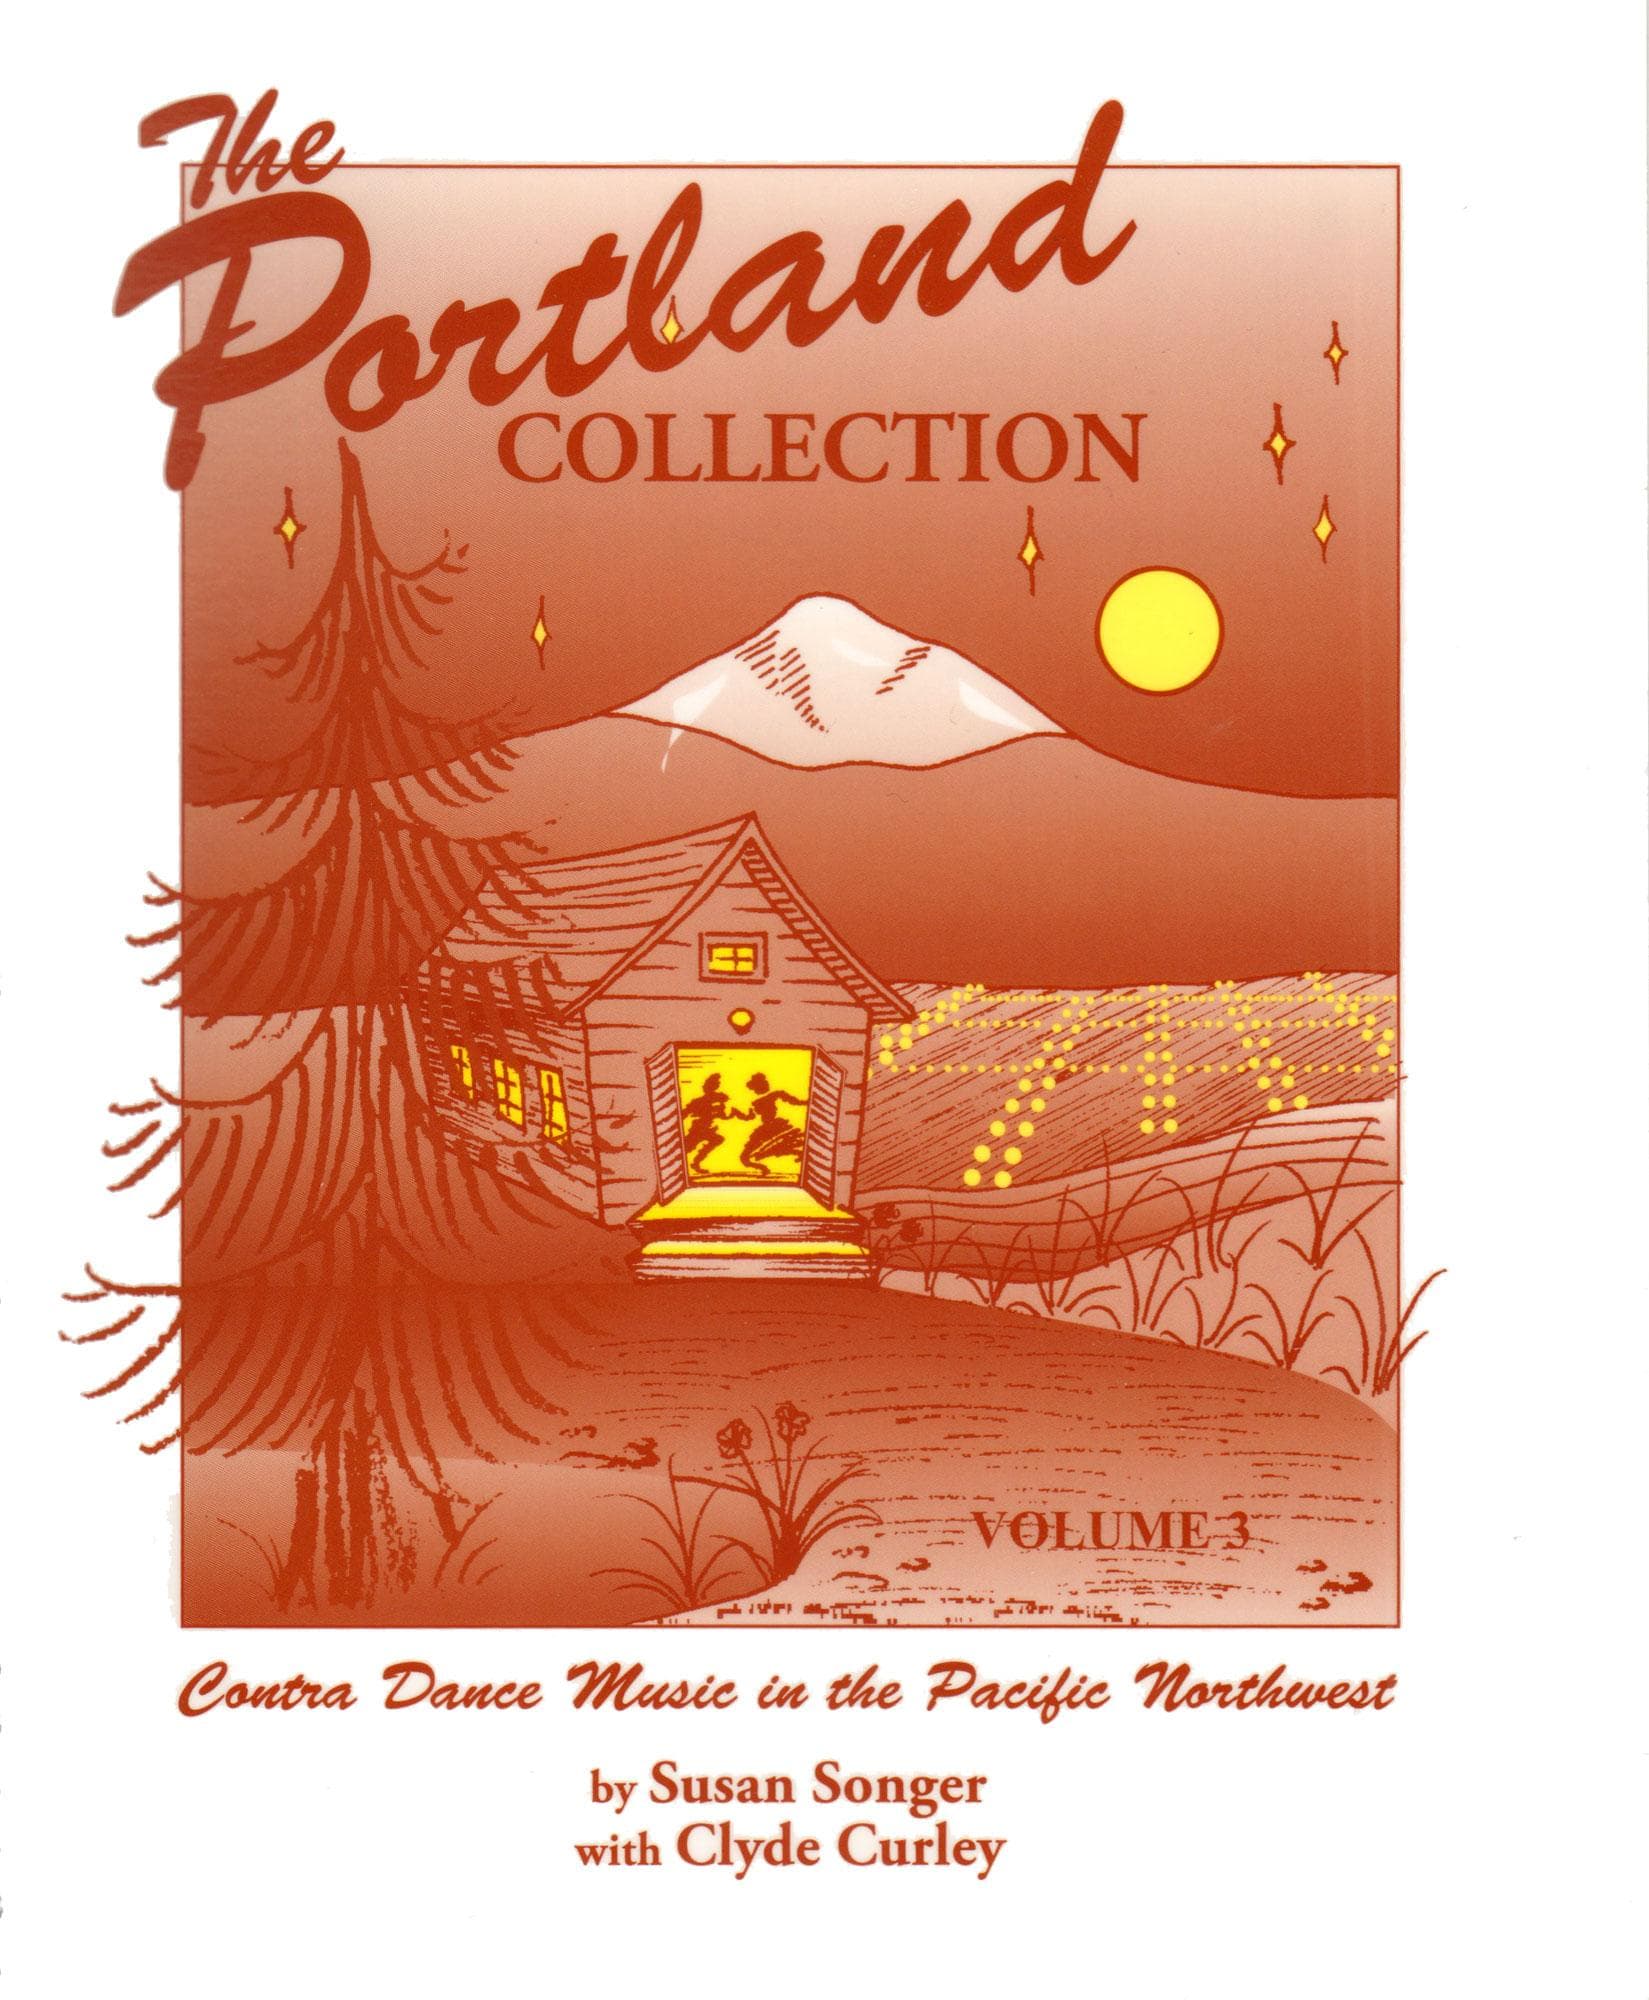 The Portland Collection, Volume 3 - Contra Music in the Pacific Northwest - edited by Susan Songer and Clyde Curley